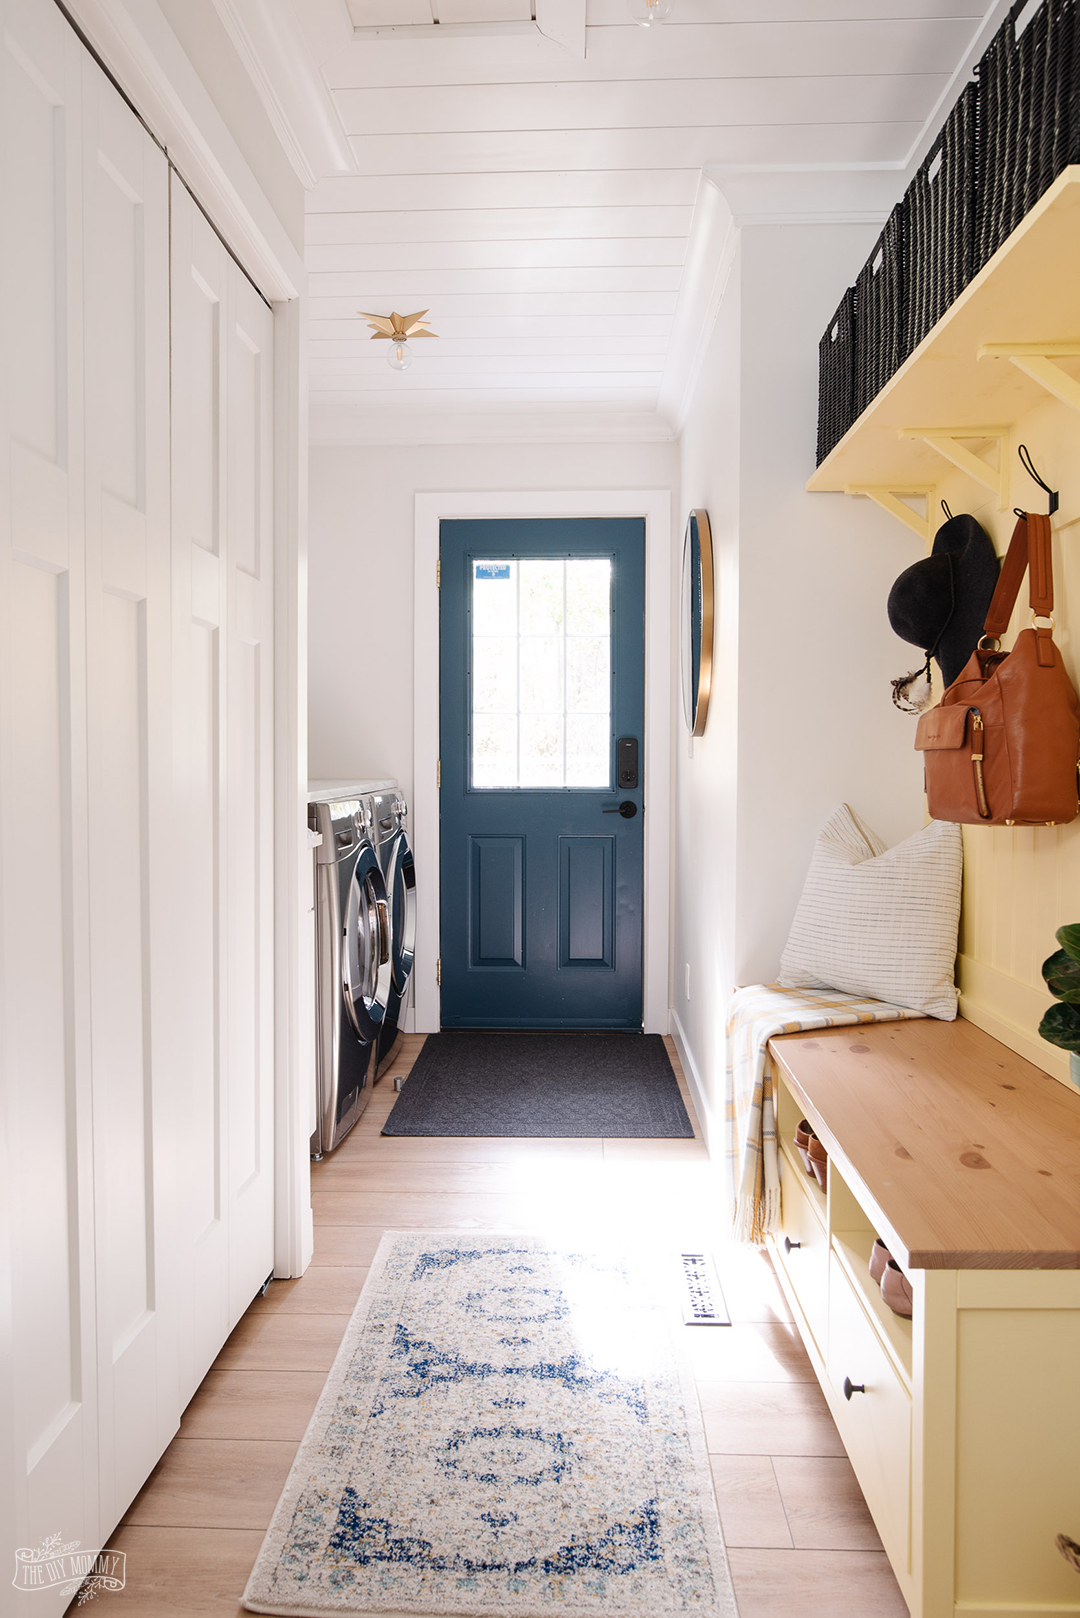 See how we transformed a tiny entryway into a cheerful combination mudroom and laundry room